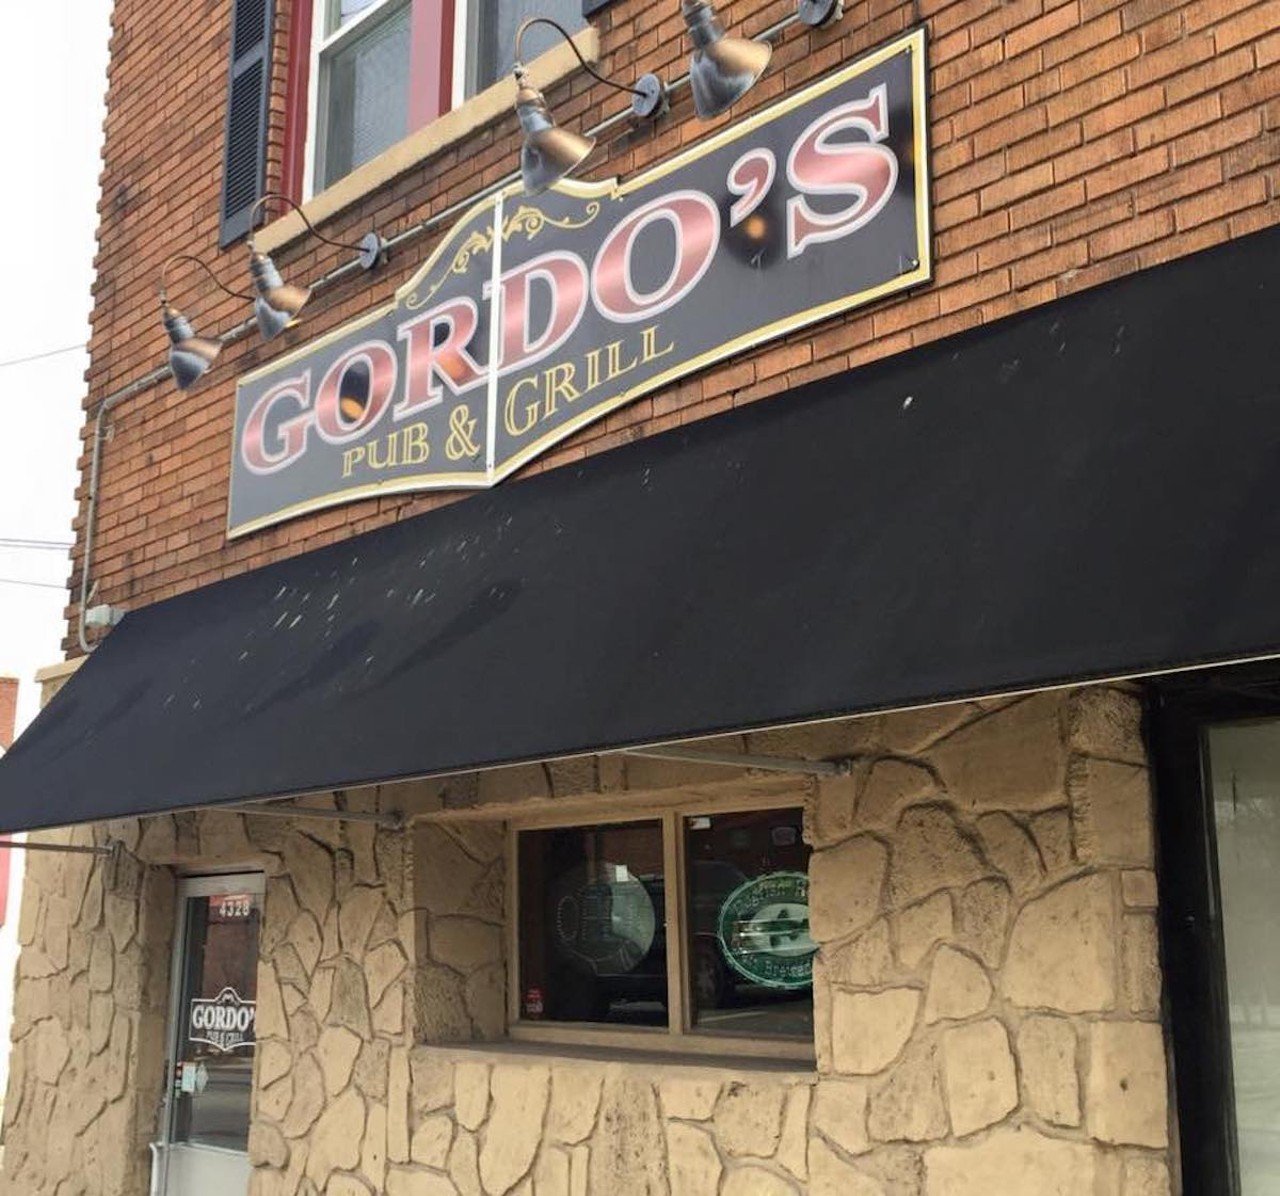 Gordo’s Pub & Grill: Jean-Robert
4328 Montgomery Road, Norwood
Who it’s named after: Late Cincinnati chef Jean-Robert de Cavel, who was friends with Gordo’s owner, Raymond Gordo
The burger: Features lettuce, grape compote, mayo and bleu and goat cheese.